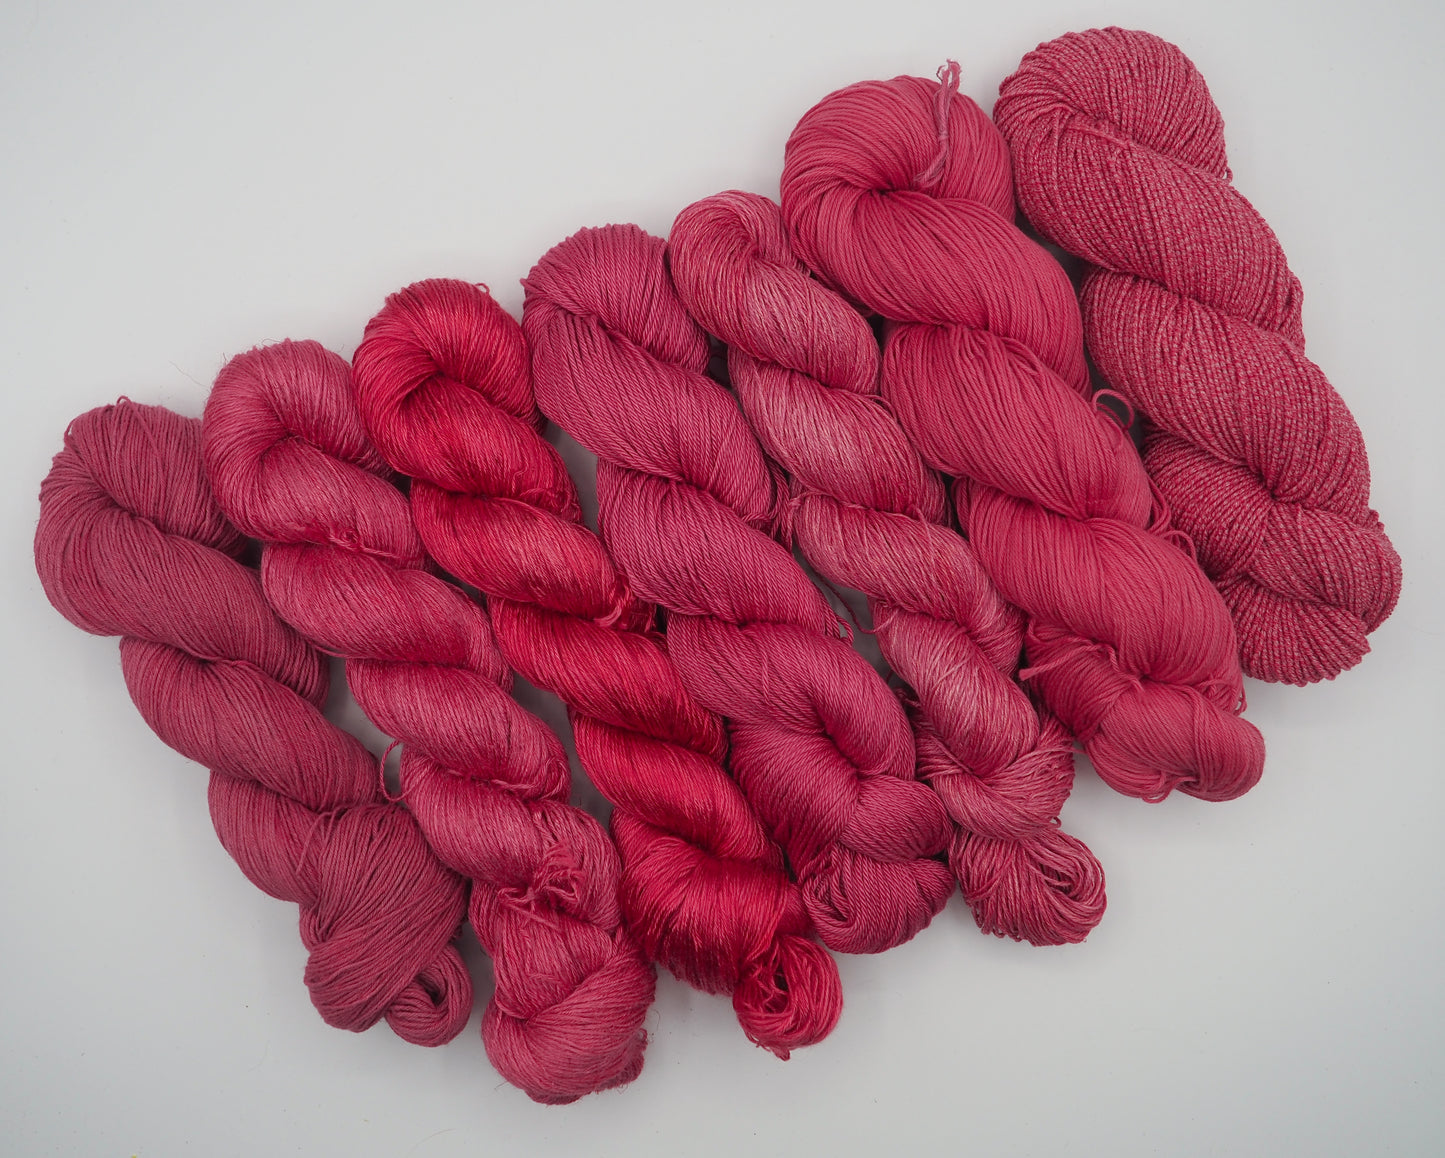 Rosy - Dyed to Order *Please allow 3-4 weeks for dyeing*